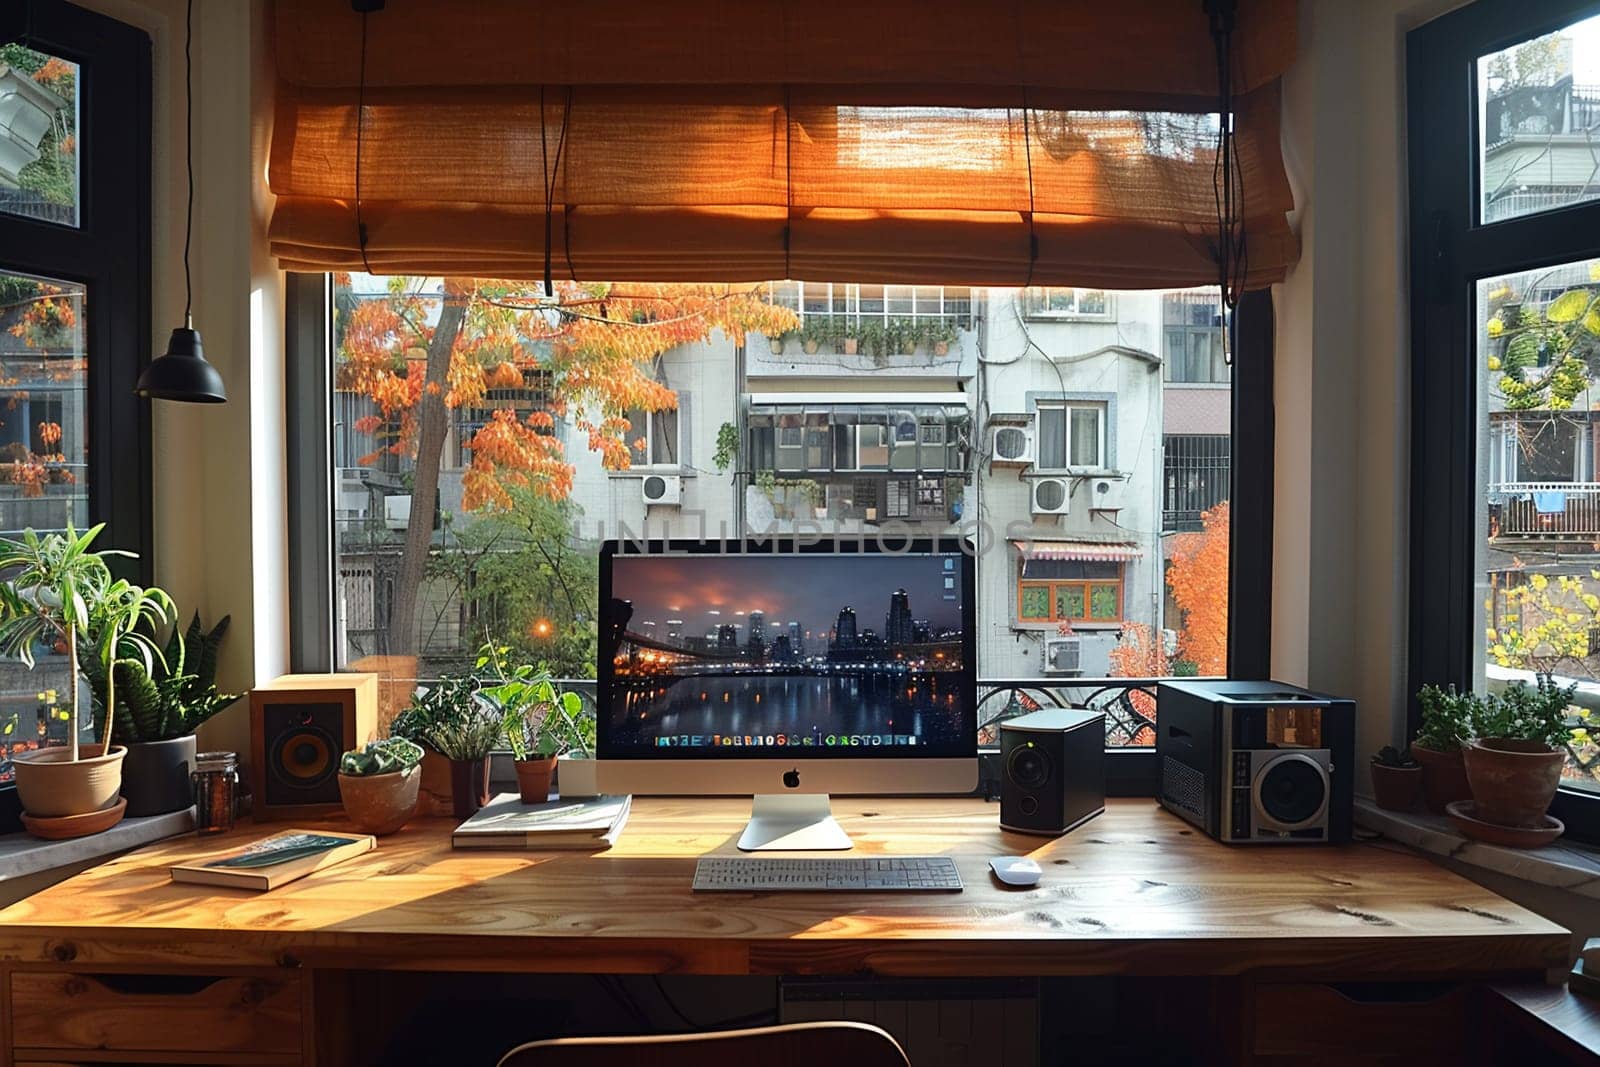 Neatly organized home office workspace by Benzoix